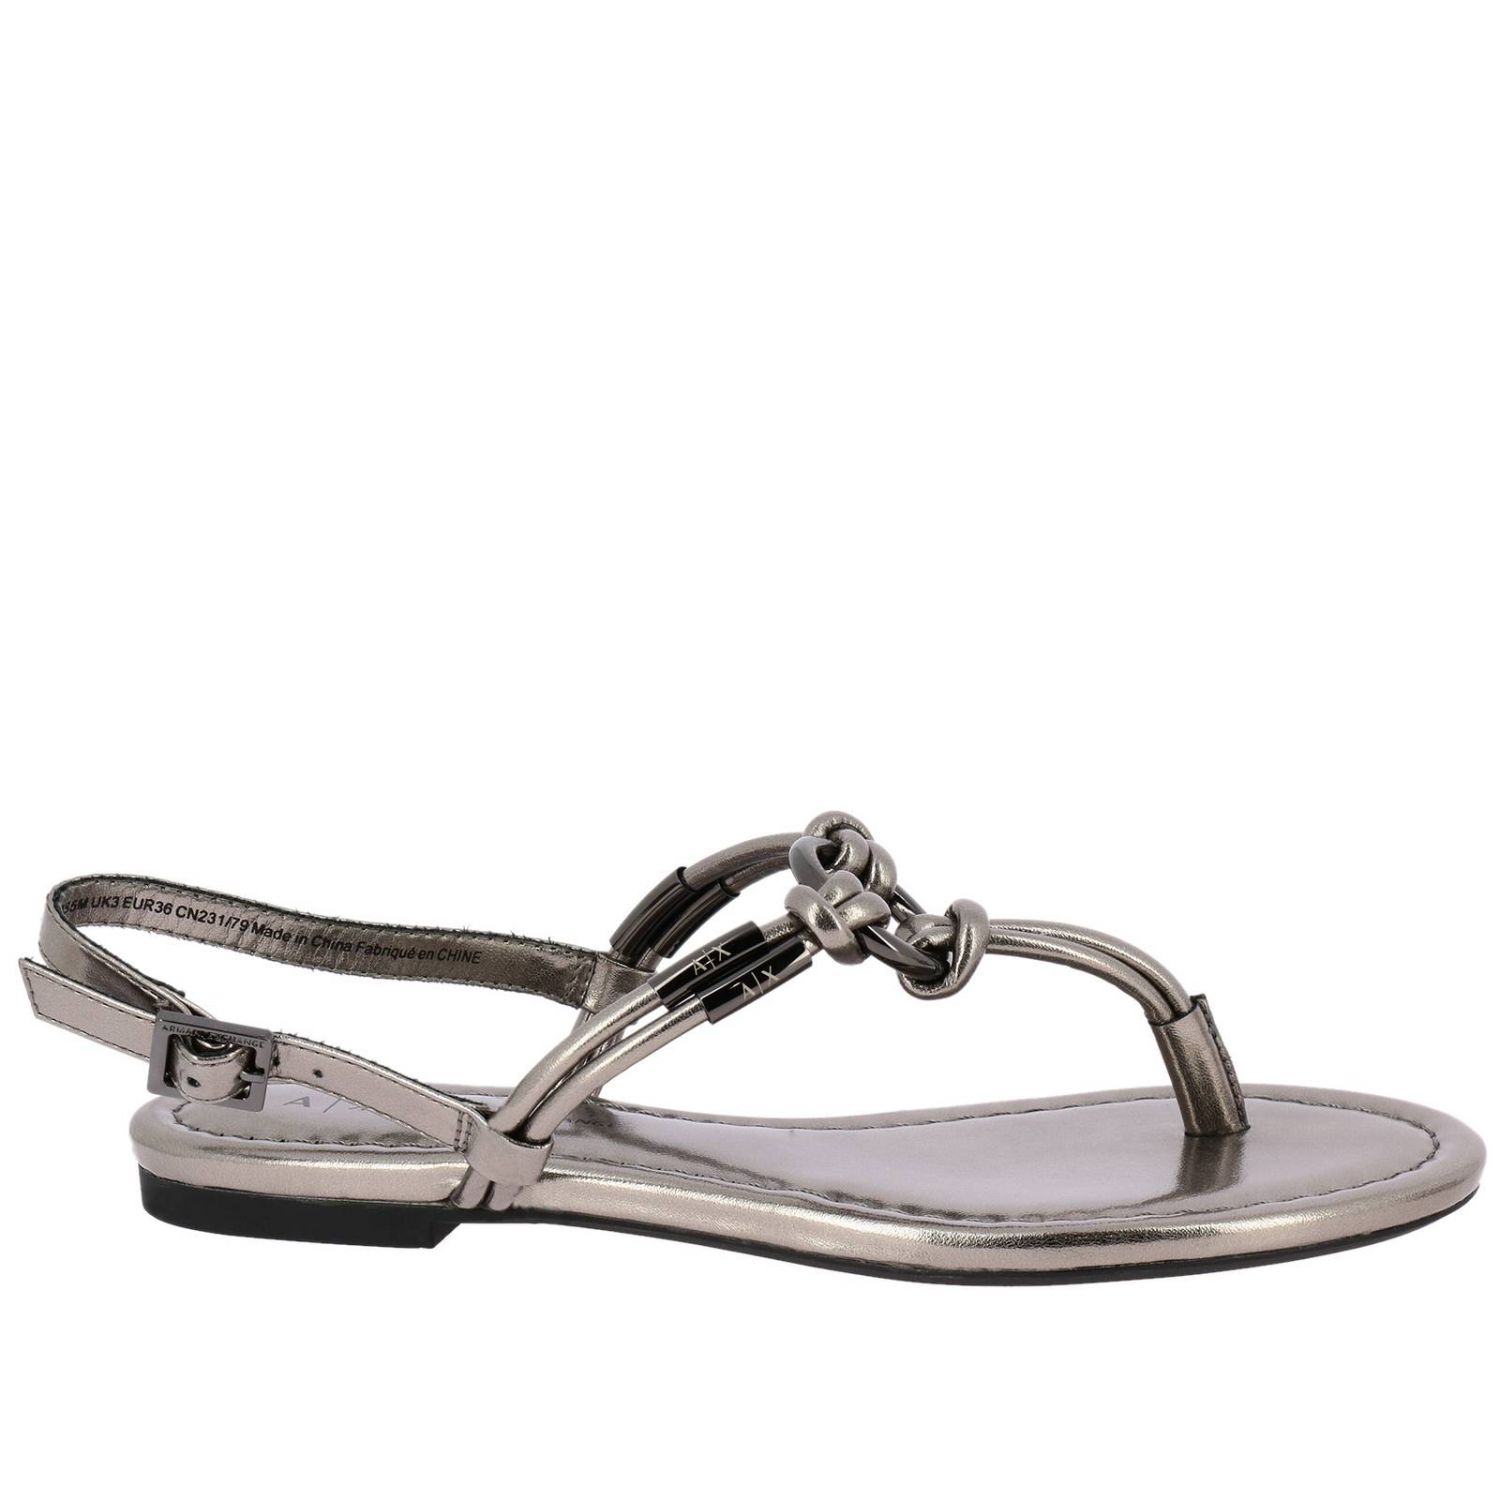 Armani Exchange Outlet: flat sandals for woman - Silver | Armani ...